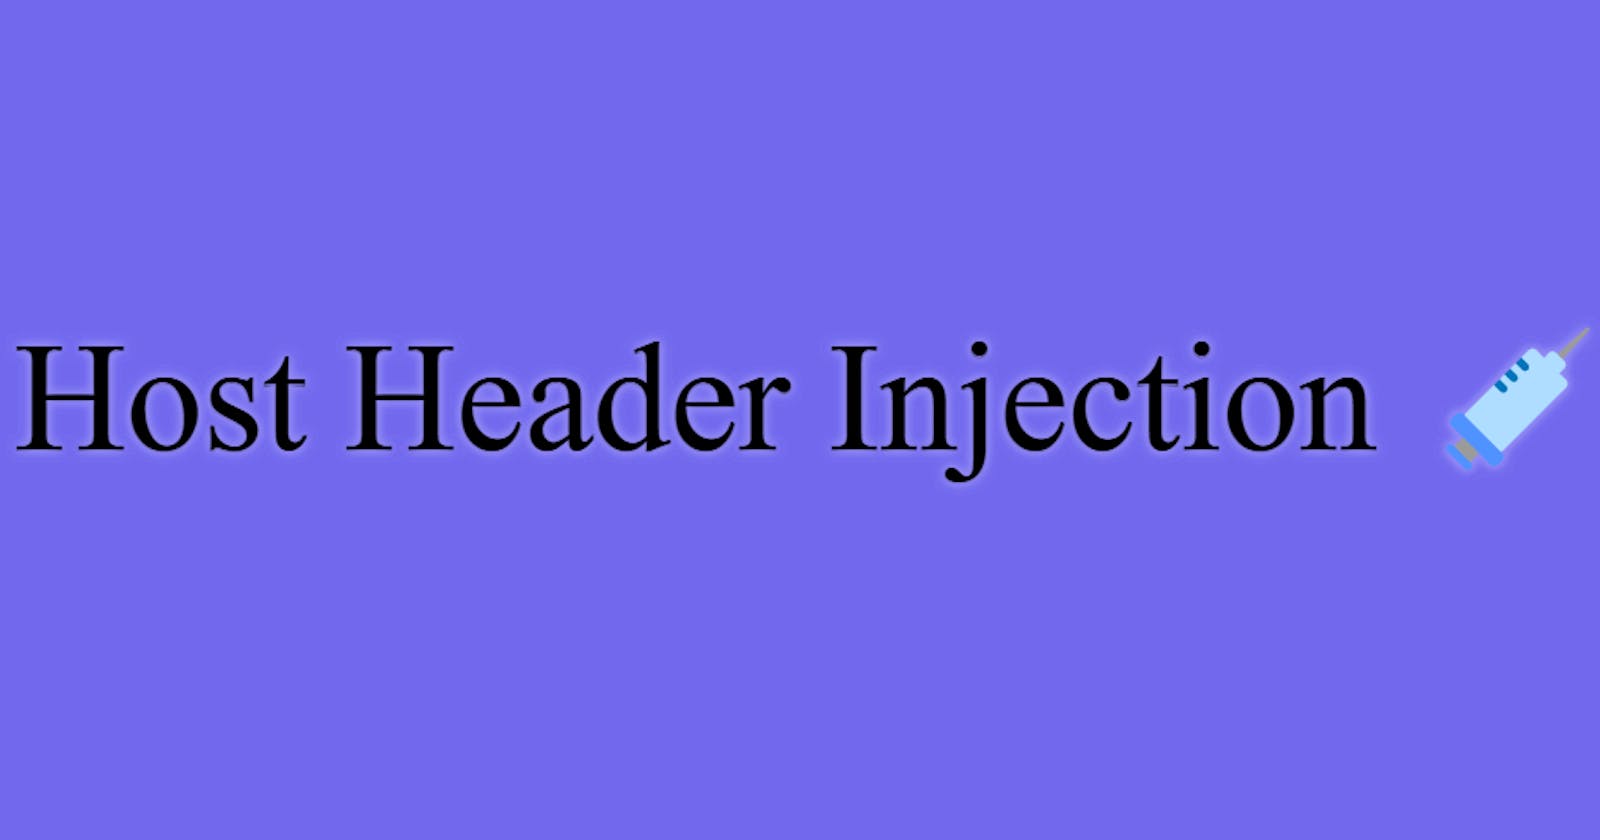 Find & Prevent Host Header Injection with These Resources